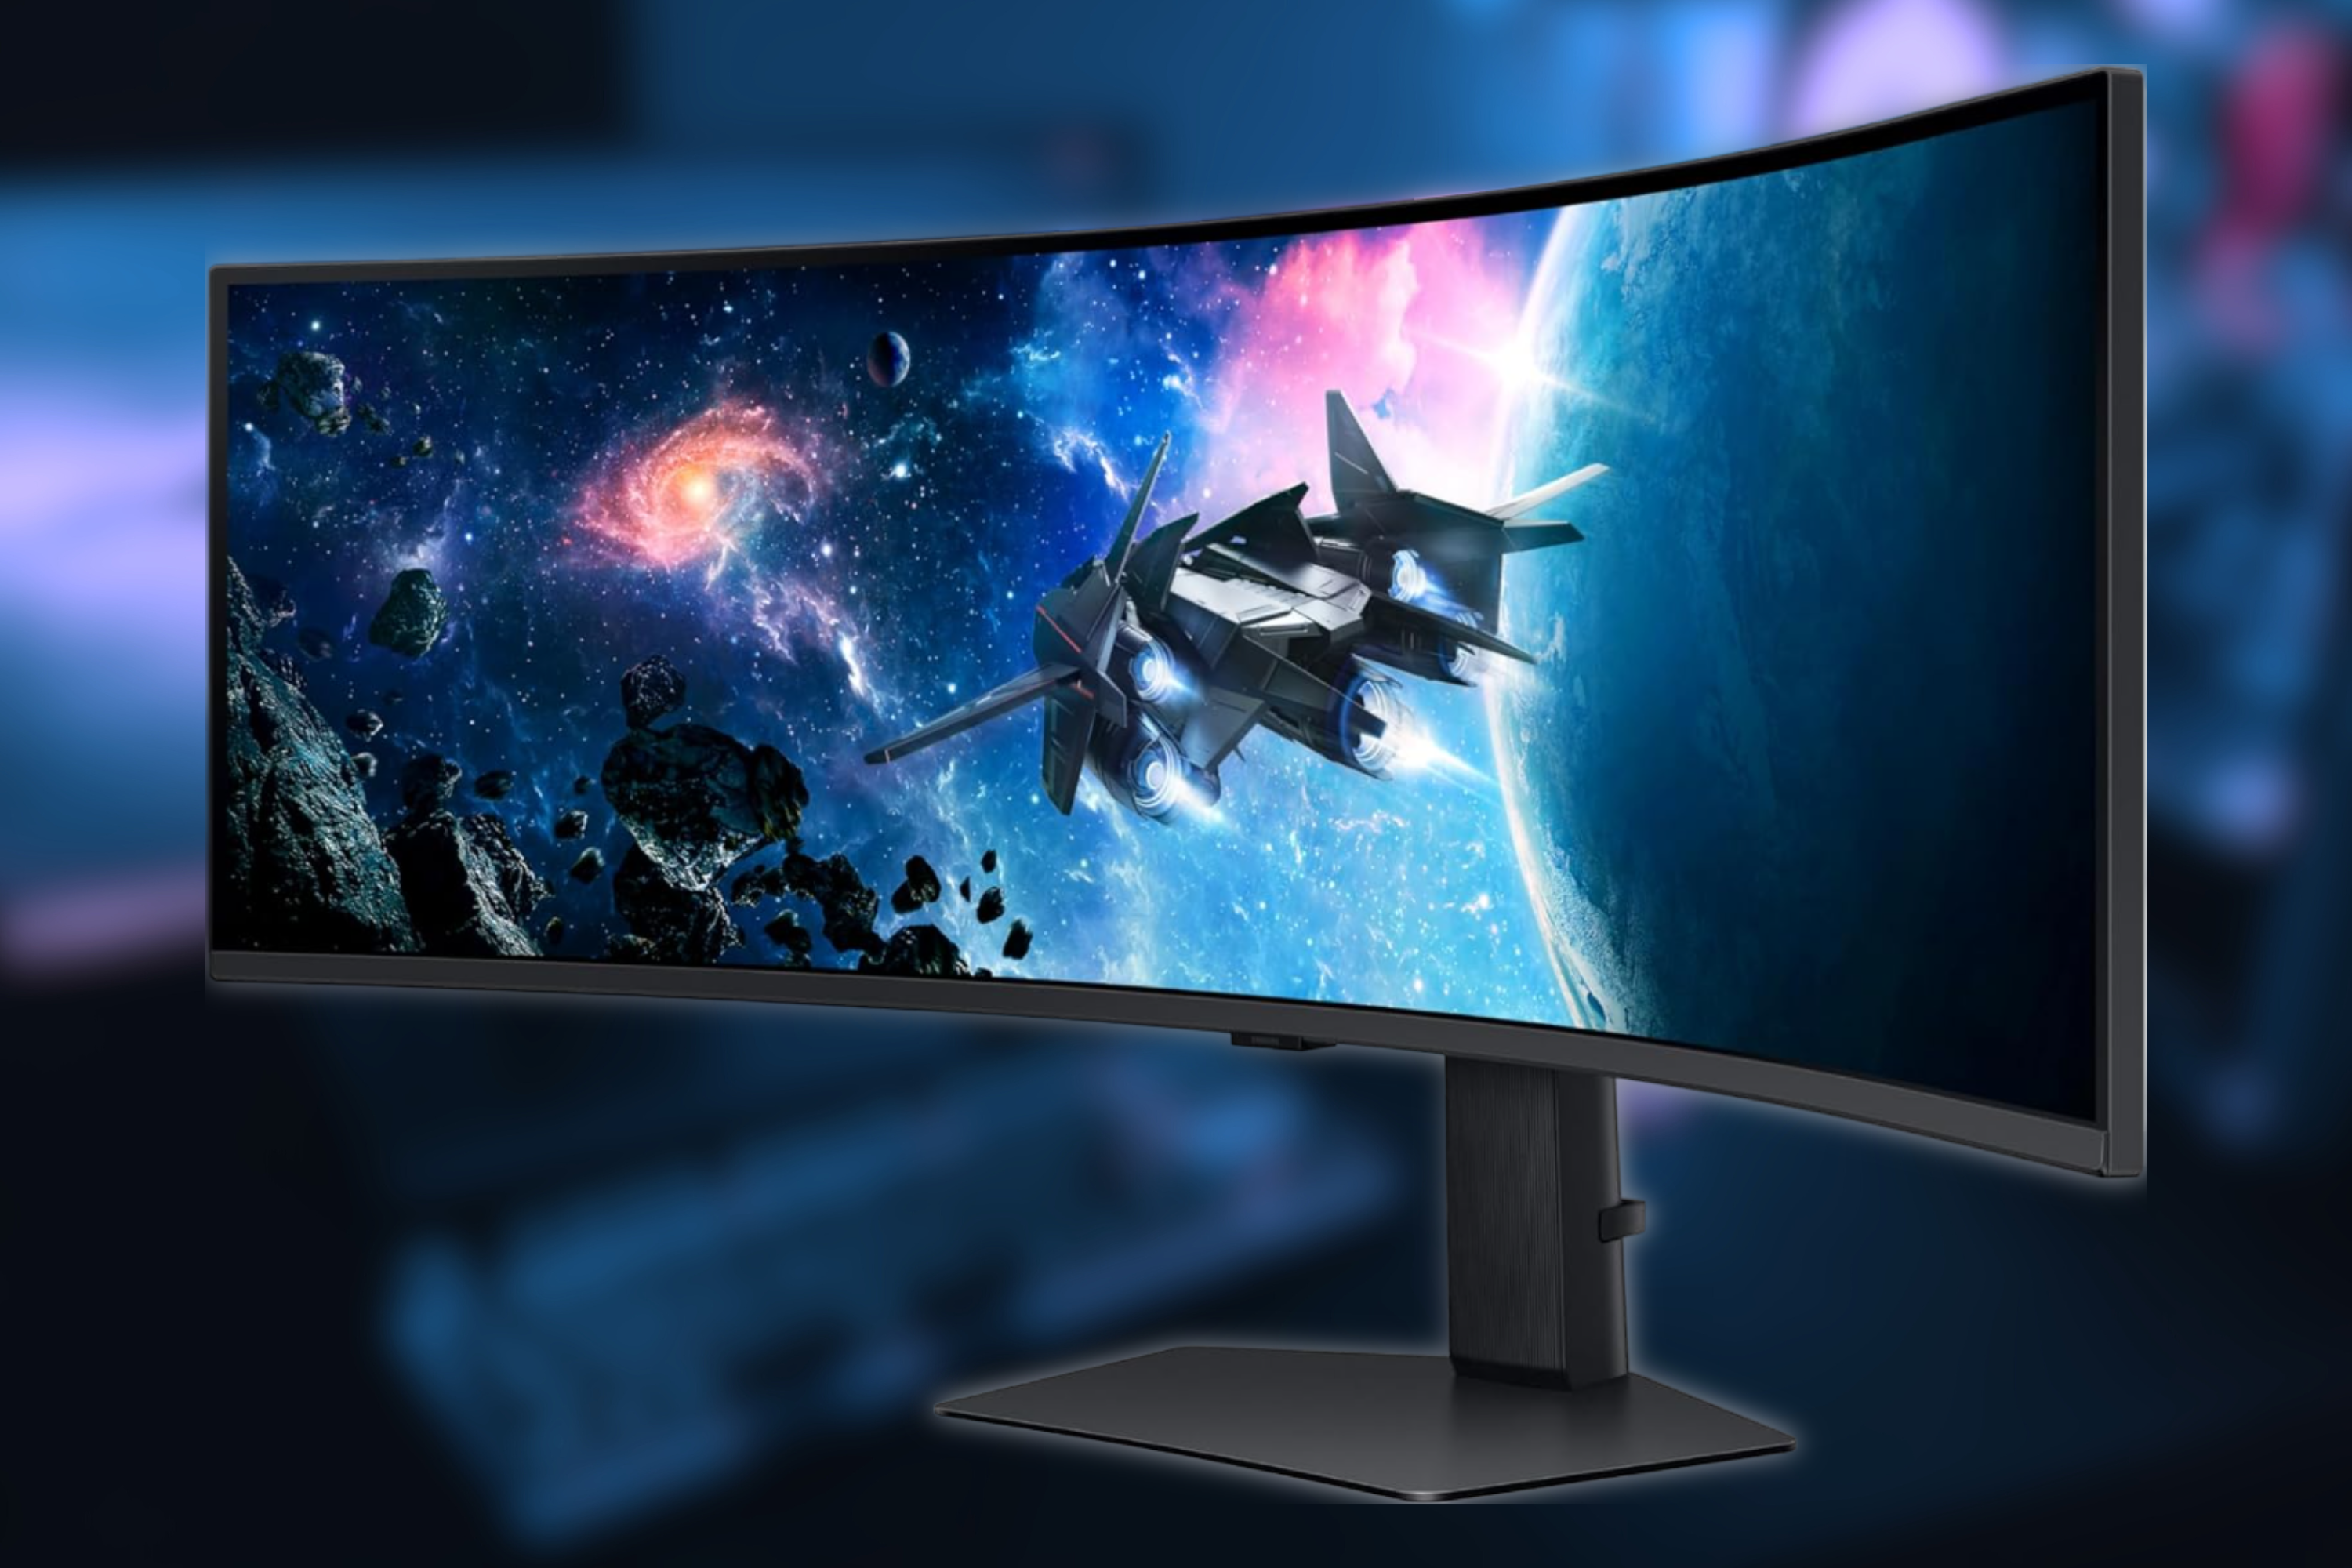 Samsung's 49-inch Odyssey G9 ultrawide monitor gets extreme $500 discount, falling to lowest price ever